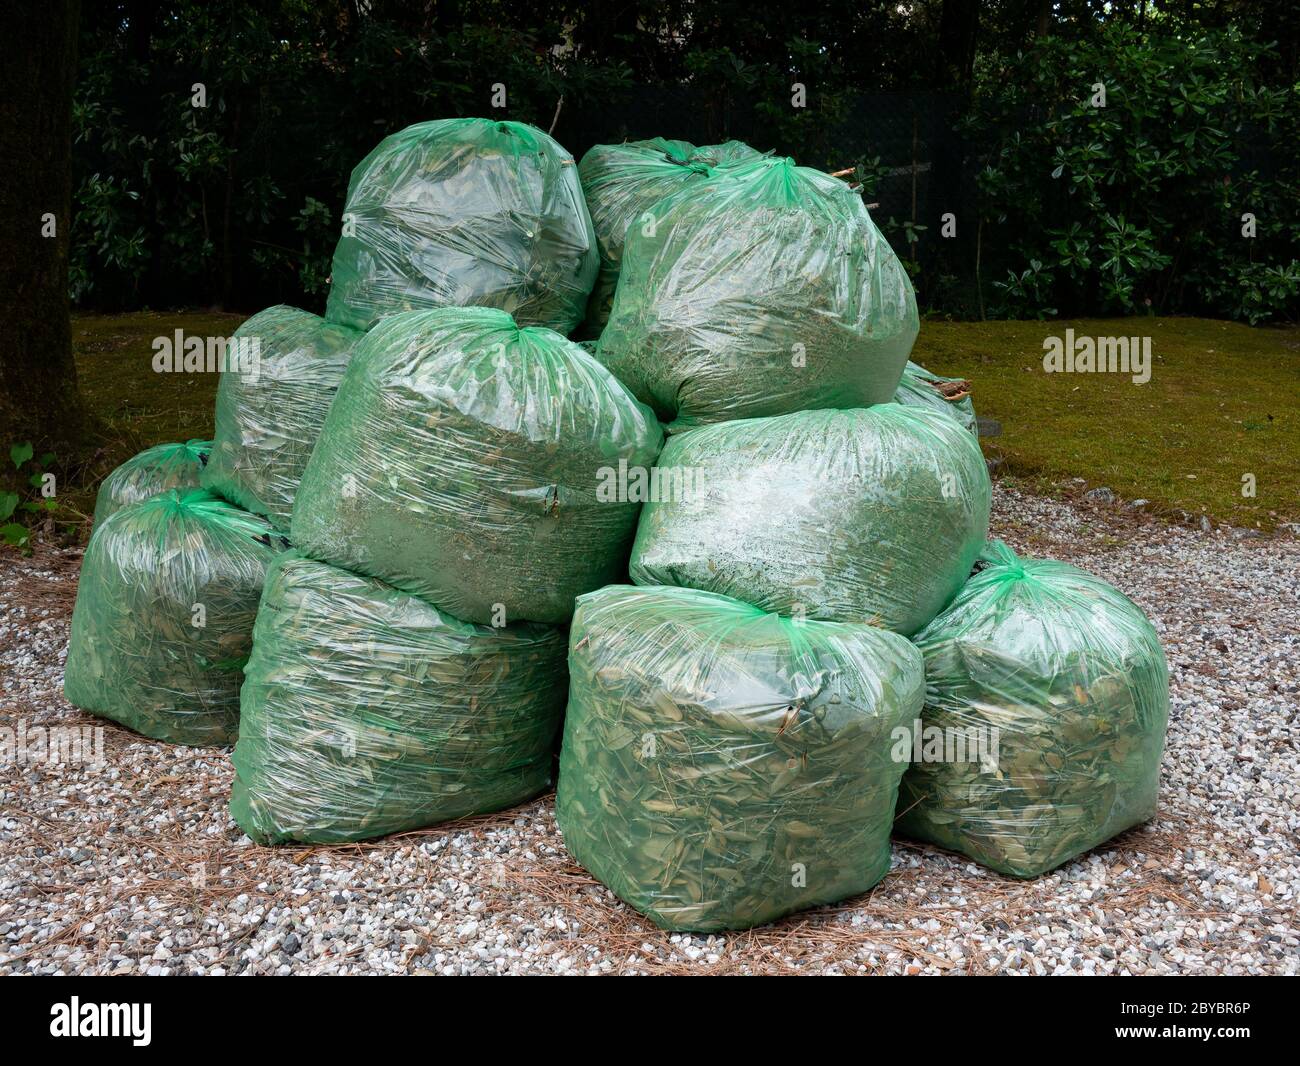 https://c8.alamy.com/comp/2BYBR6P/group-of-green-clear-plastic-bags-filled-with-organic-waste-from-garden-and-yard-2BYBR6P.jpg